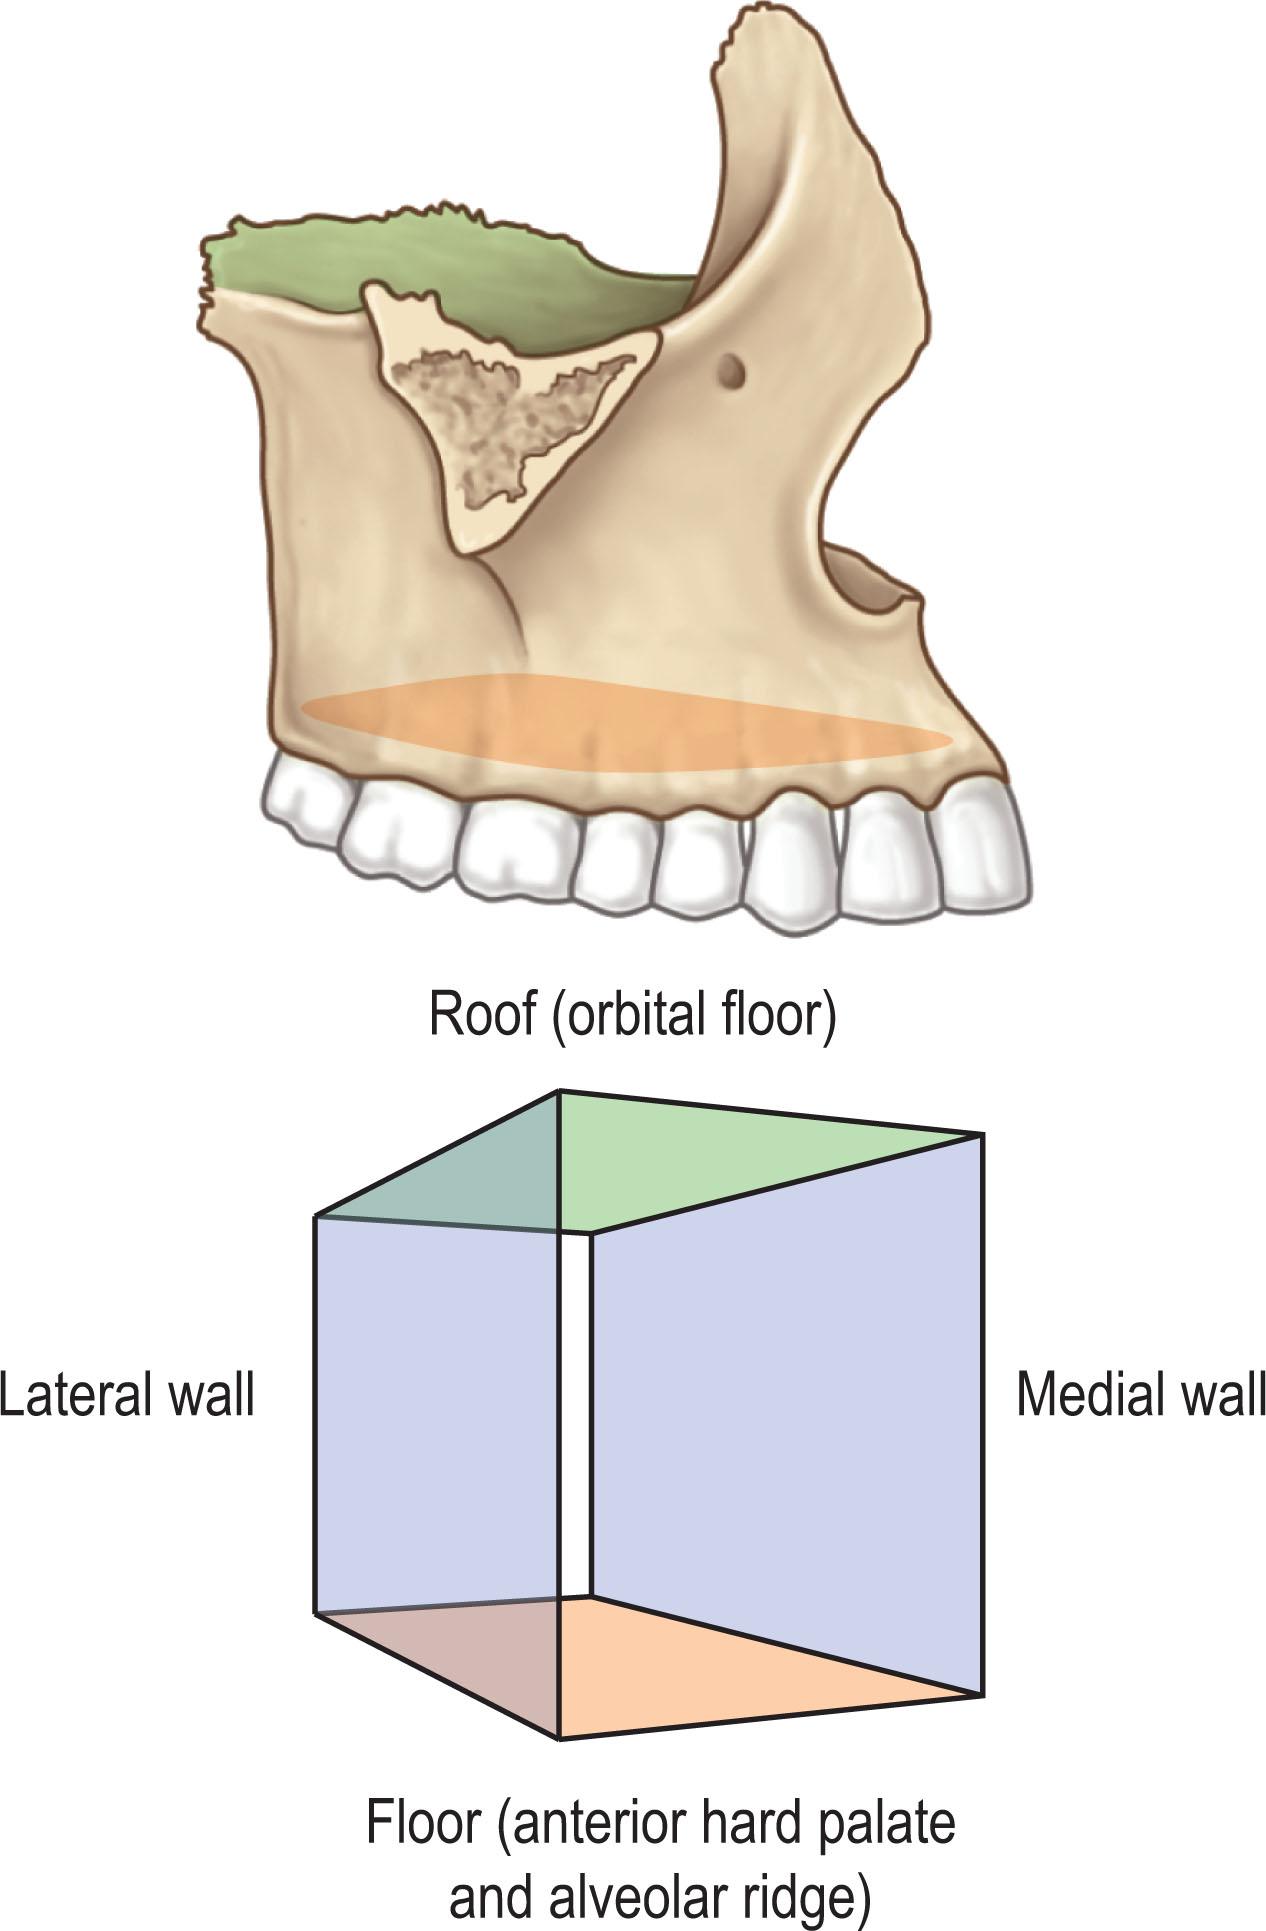 Figure 9.1, The maxilla may be thought of as a six-walled geometric box that includes the roof, which is made up of the orbital floor; the floor of the box, which is made up of each half of the anterior hard palate and alveolar ridge; and the medial wall of the box, which forms the lateral walls of the nasal passage.